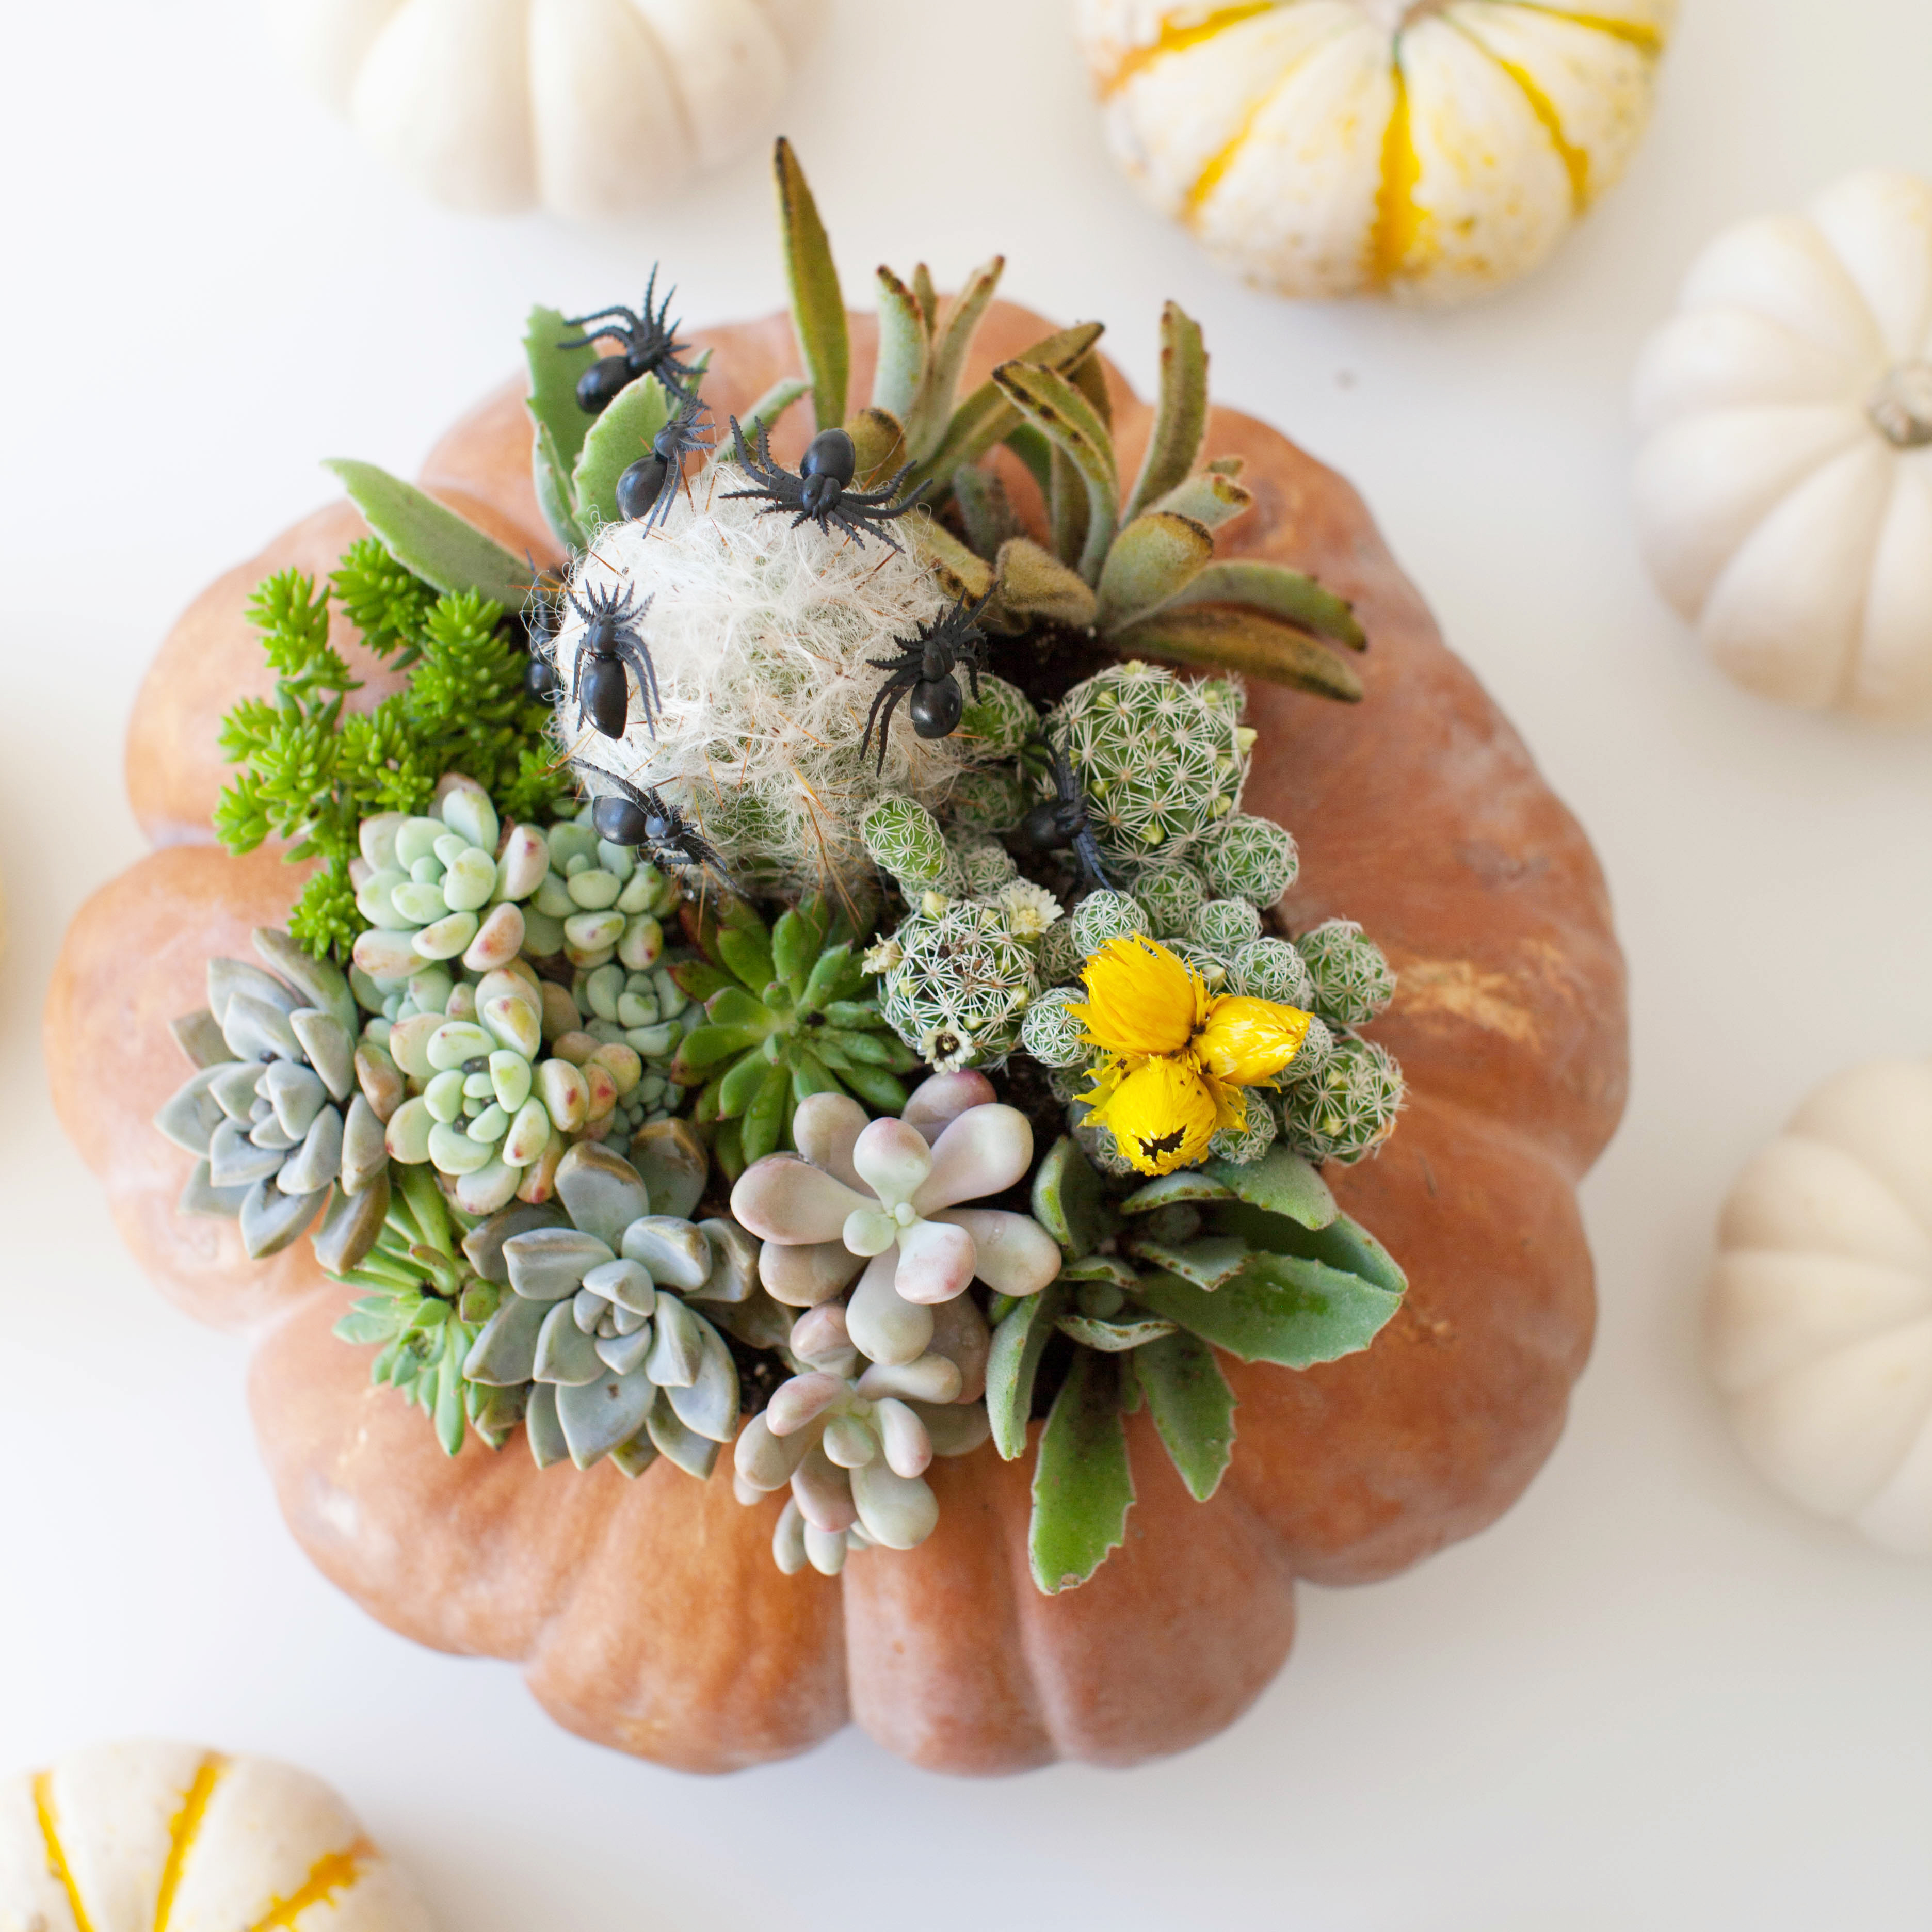 Use a pumpkin as a planter for succulents and cacti.jpg